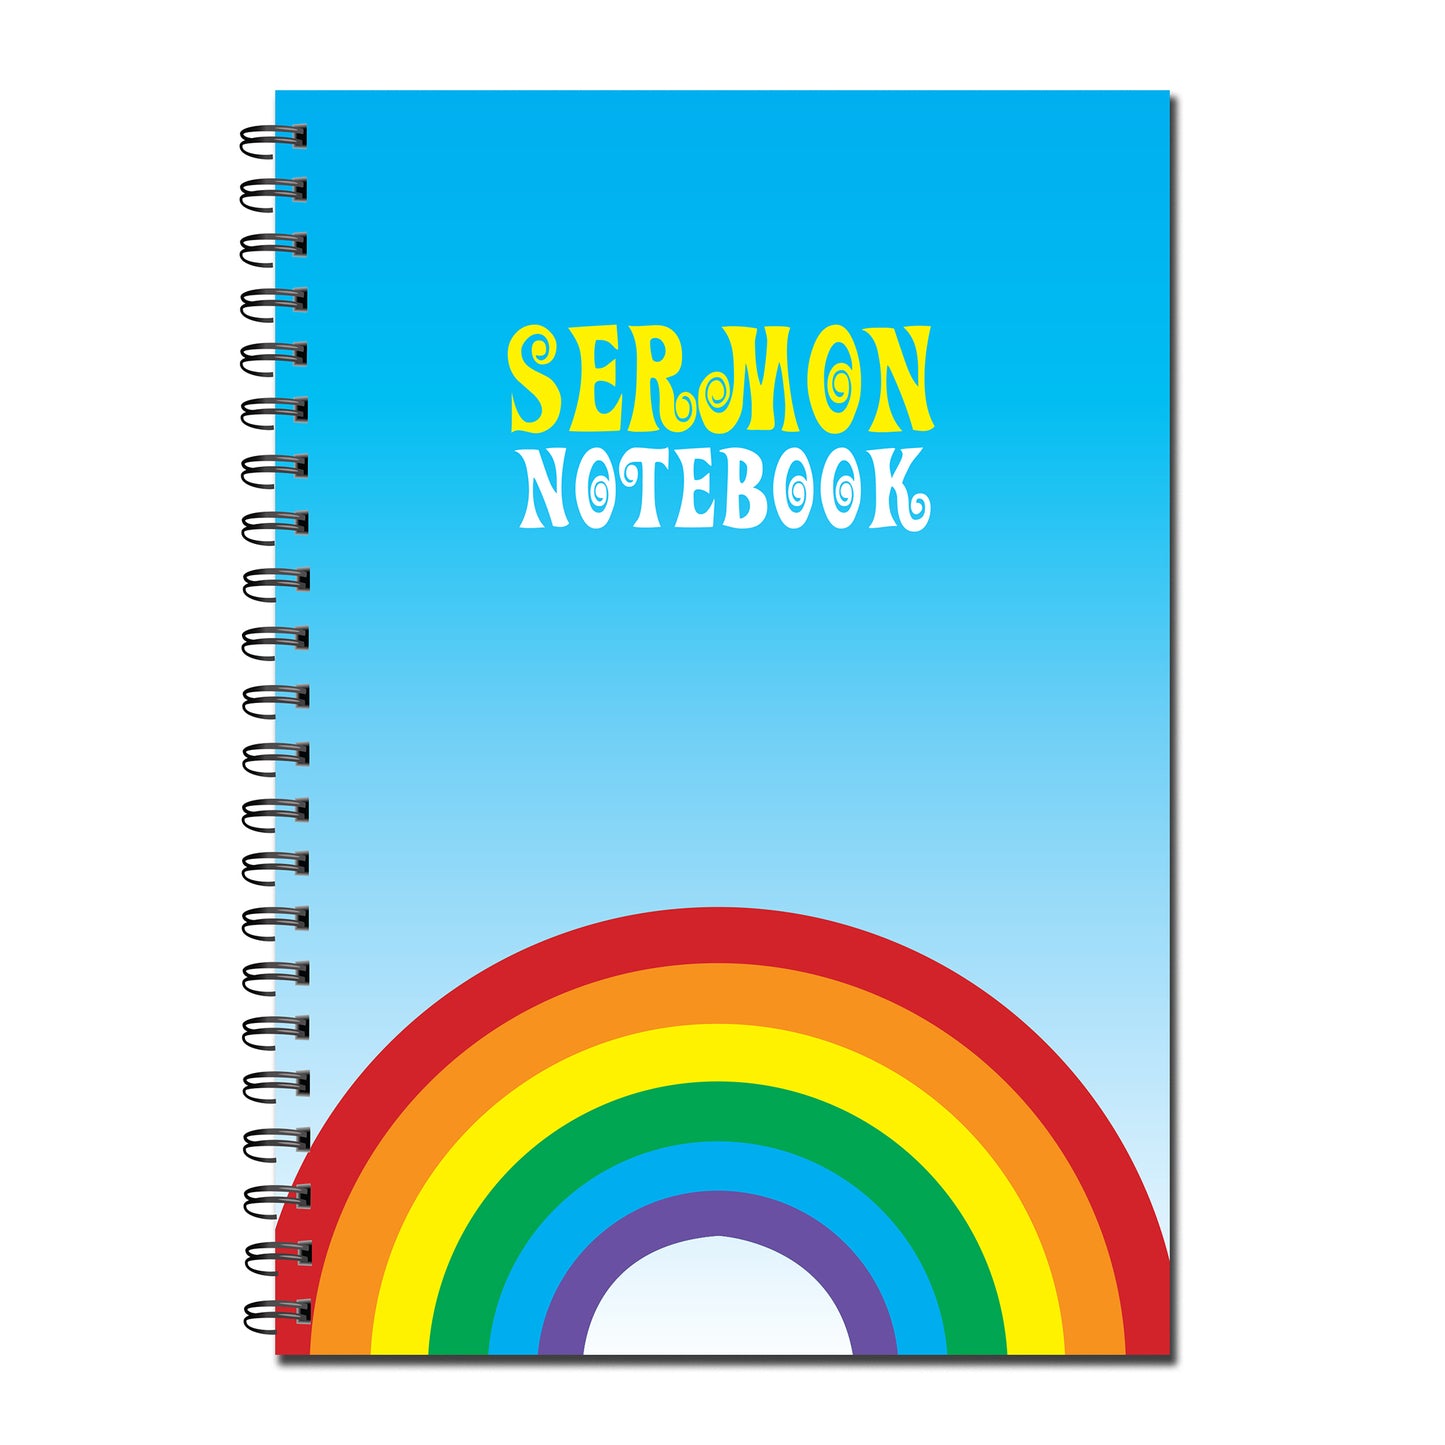 Sermon Notebook | Church Notes | A5 (148mm x 210mm) | 50 double sided pages Wirobound